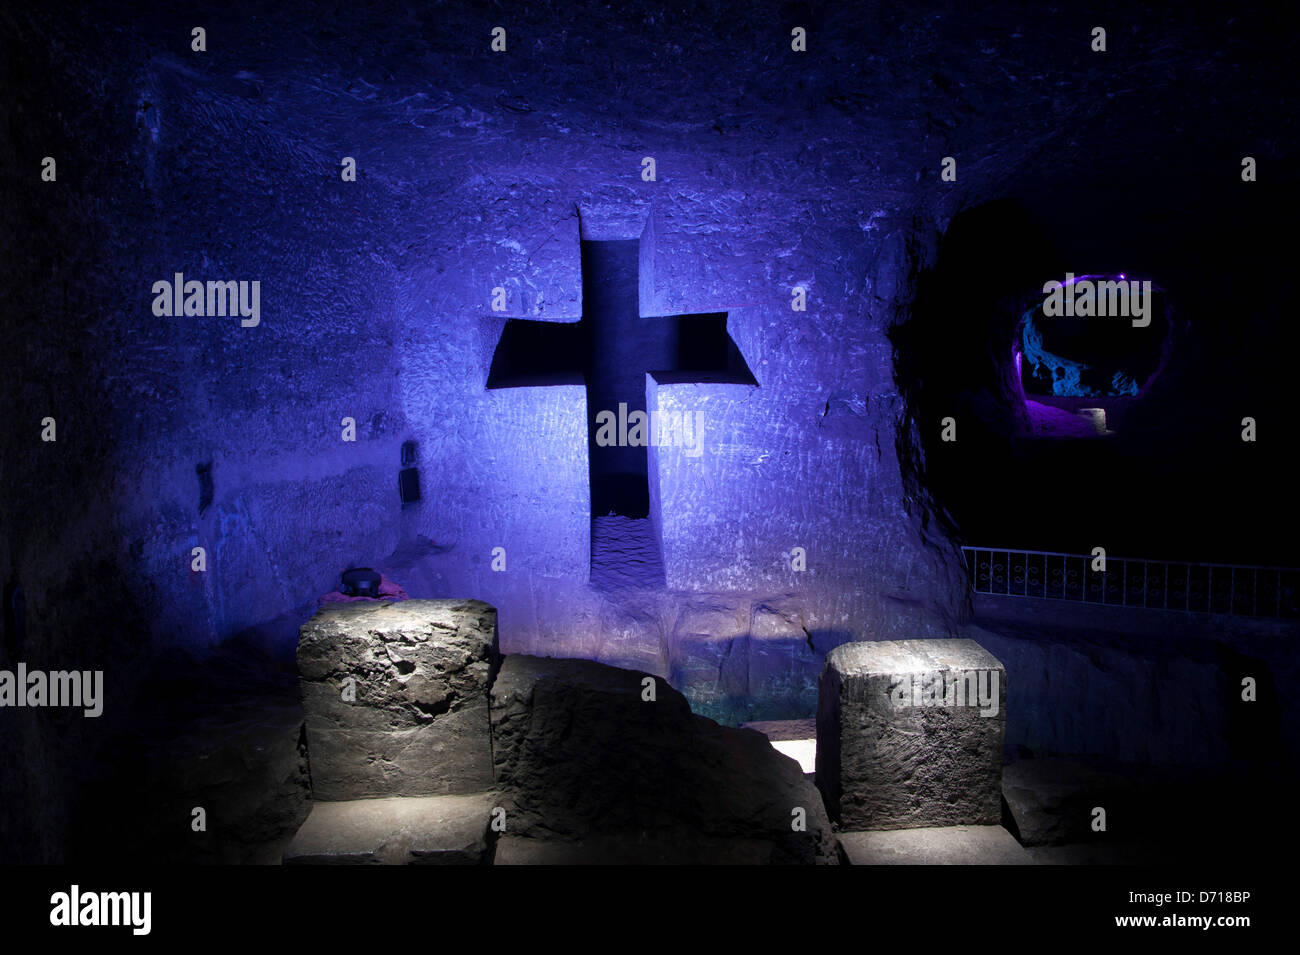 Stations Of The Cross At The Salt Cathedral (Salt Mine) In Zipaquira Near Bogota, Colombia Stock Photo